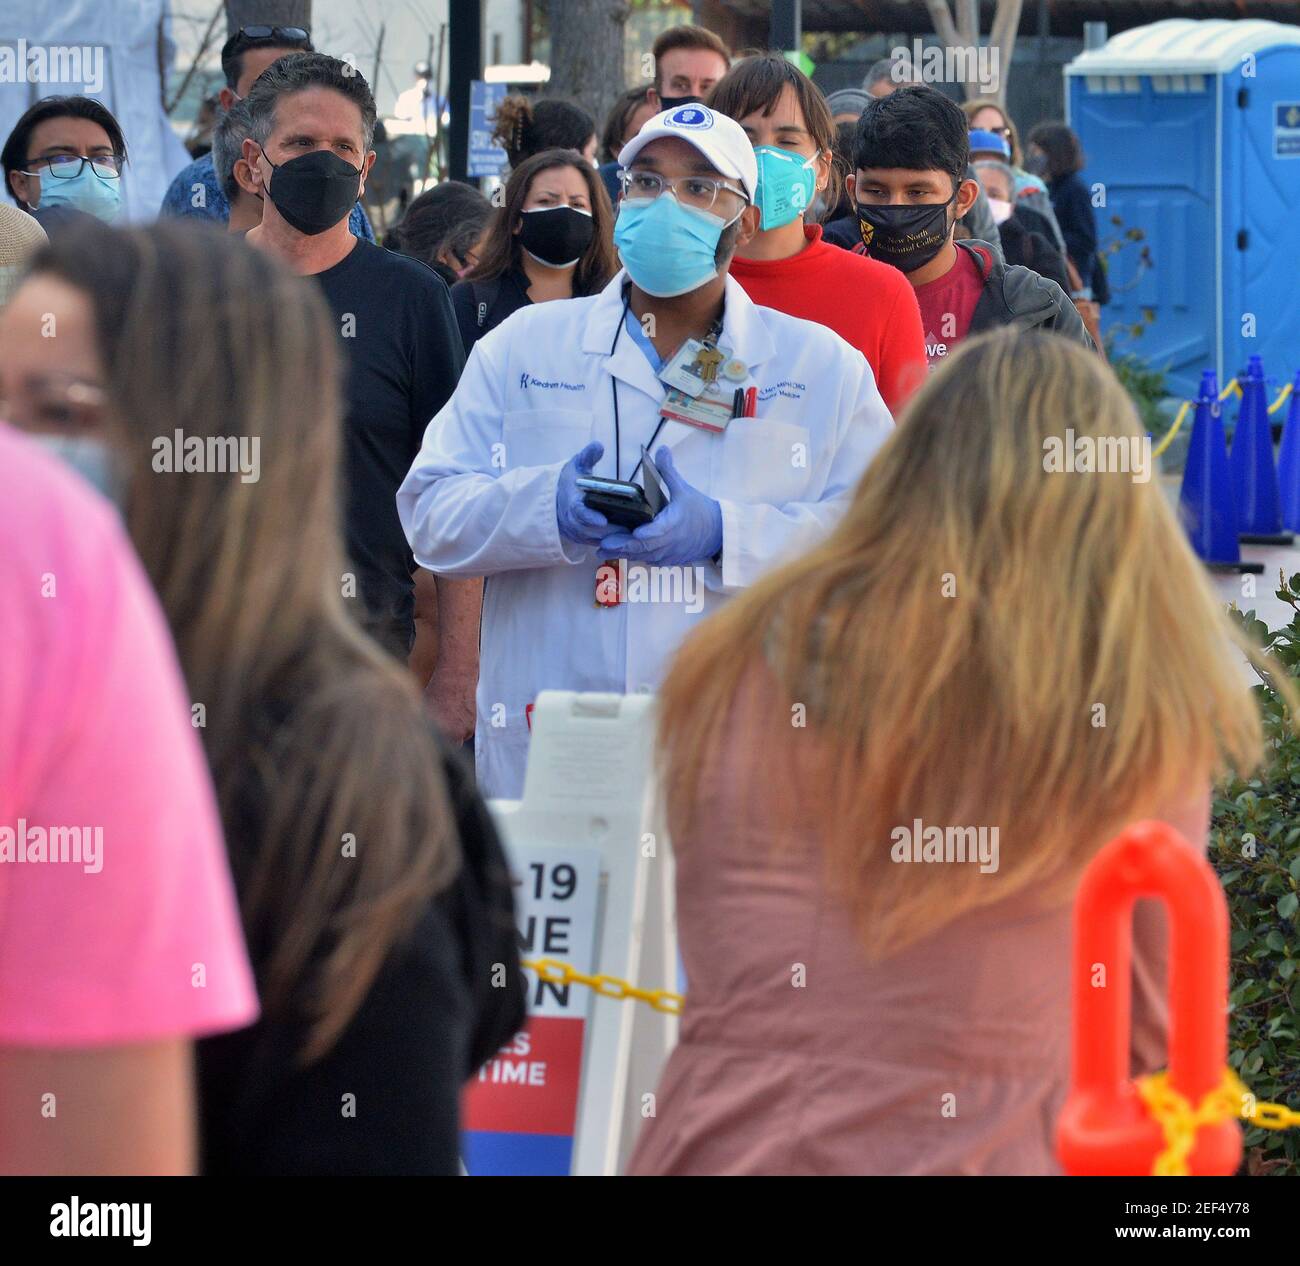 Los Angeles United States 17th Feb 2021 Dr Jerry P Abraham Stands Amongst Local Residents Waiting In Line To Receive A Covid-19 Vaccination Shot At The Kedren Community Health Center In South